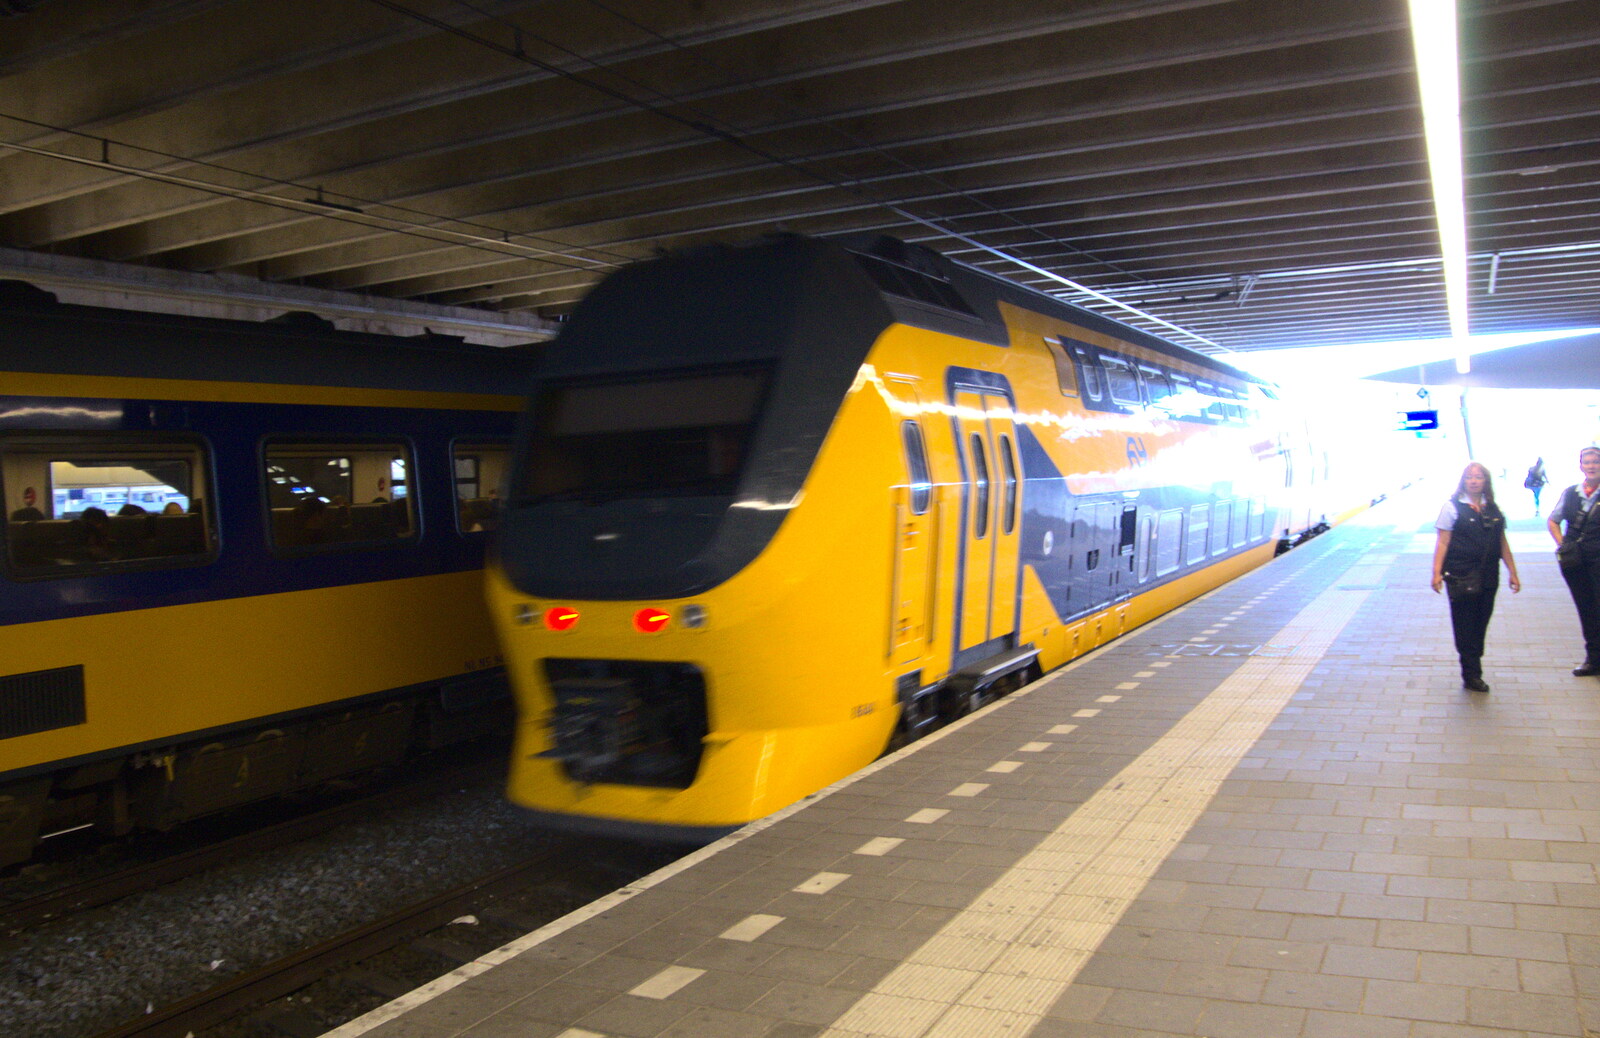 A train comes in from A Postcard from Utrecht, Nederlands - 10th June 2018